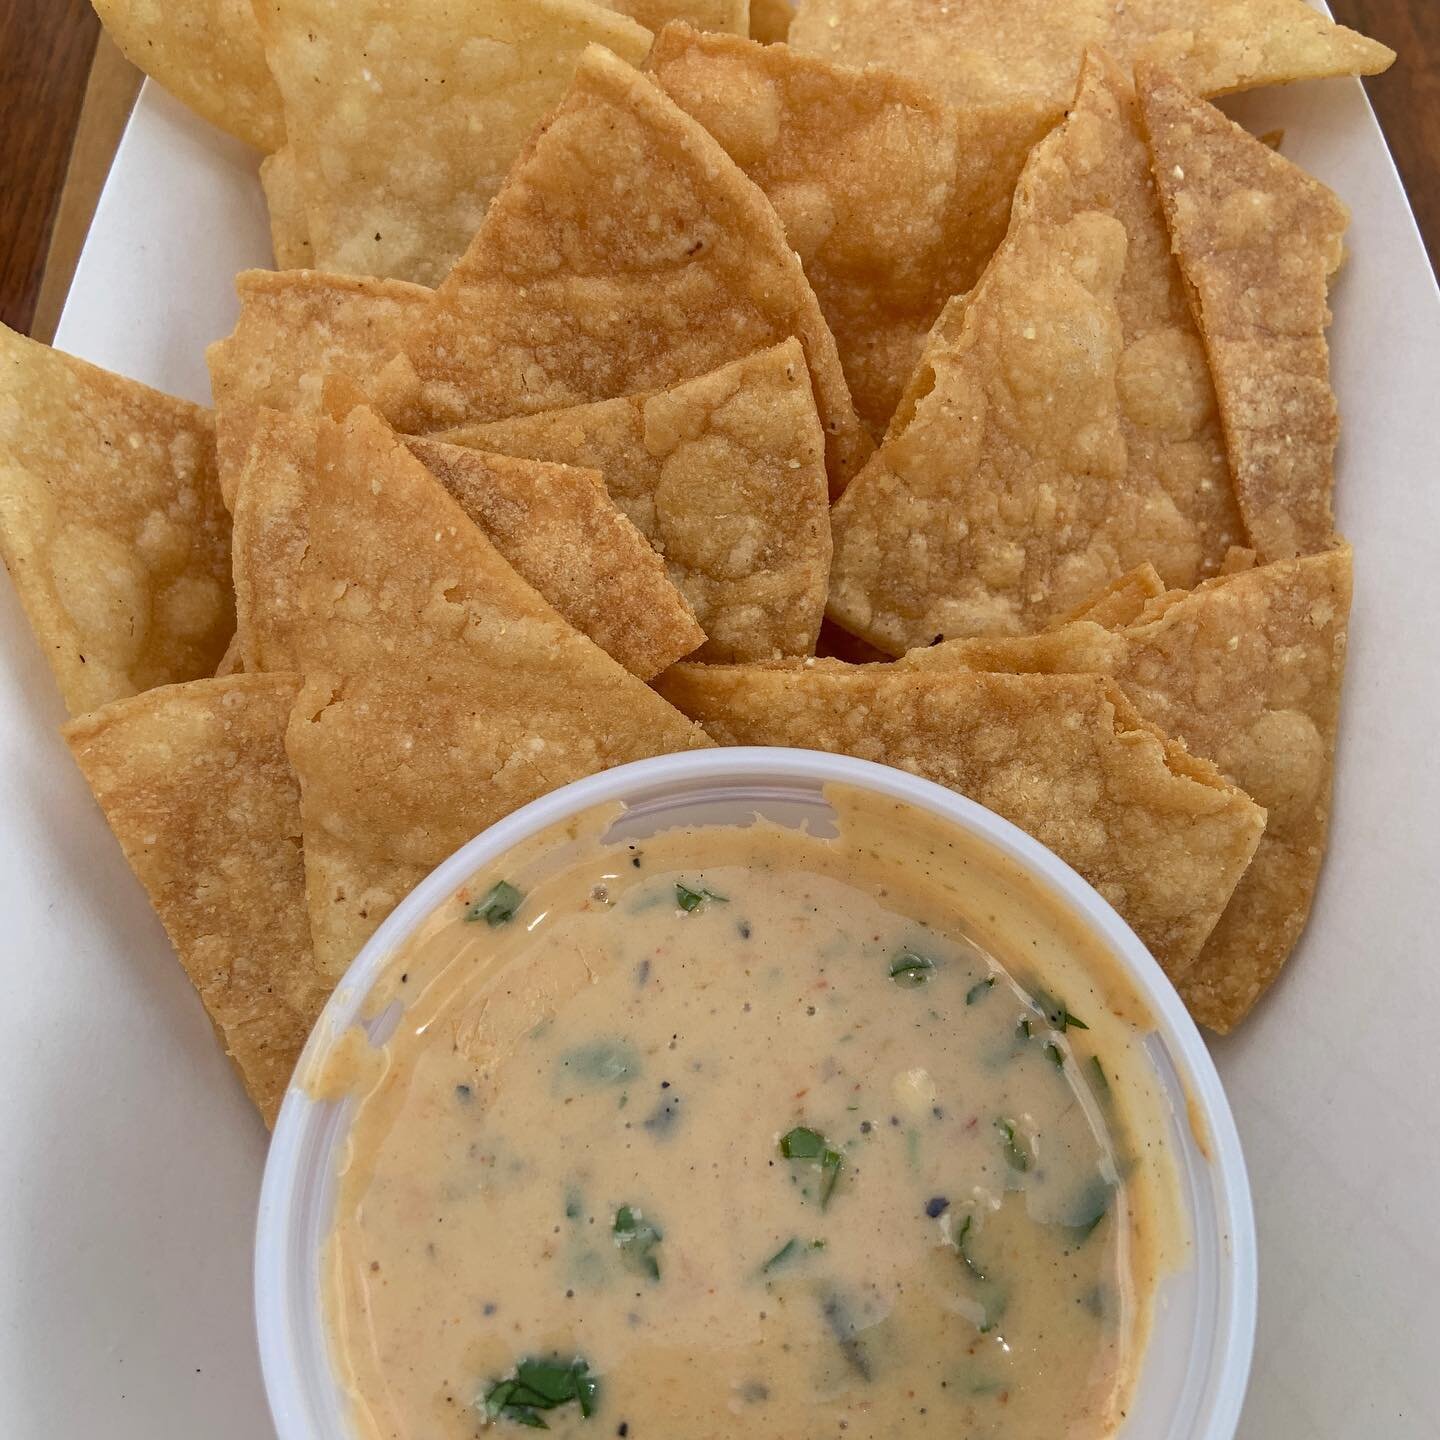 WE HAVE QUESO NOW.
Just thought y&rsquo;all would wanna know.
Locally made Amish American cheese simmered with roasted peeper, Mills River cream and finished with sharp cheddar.